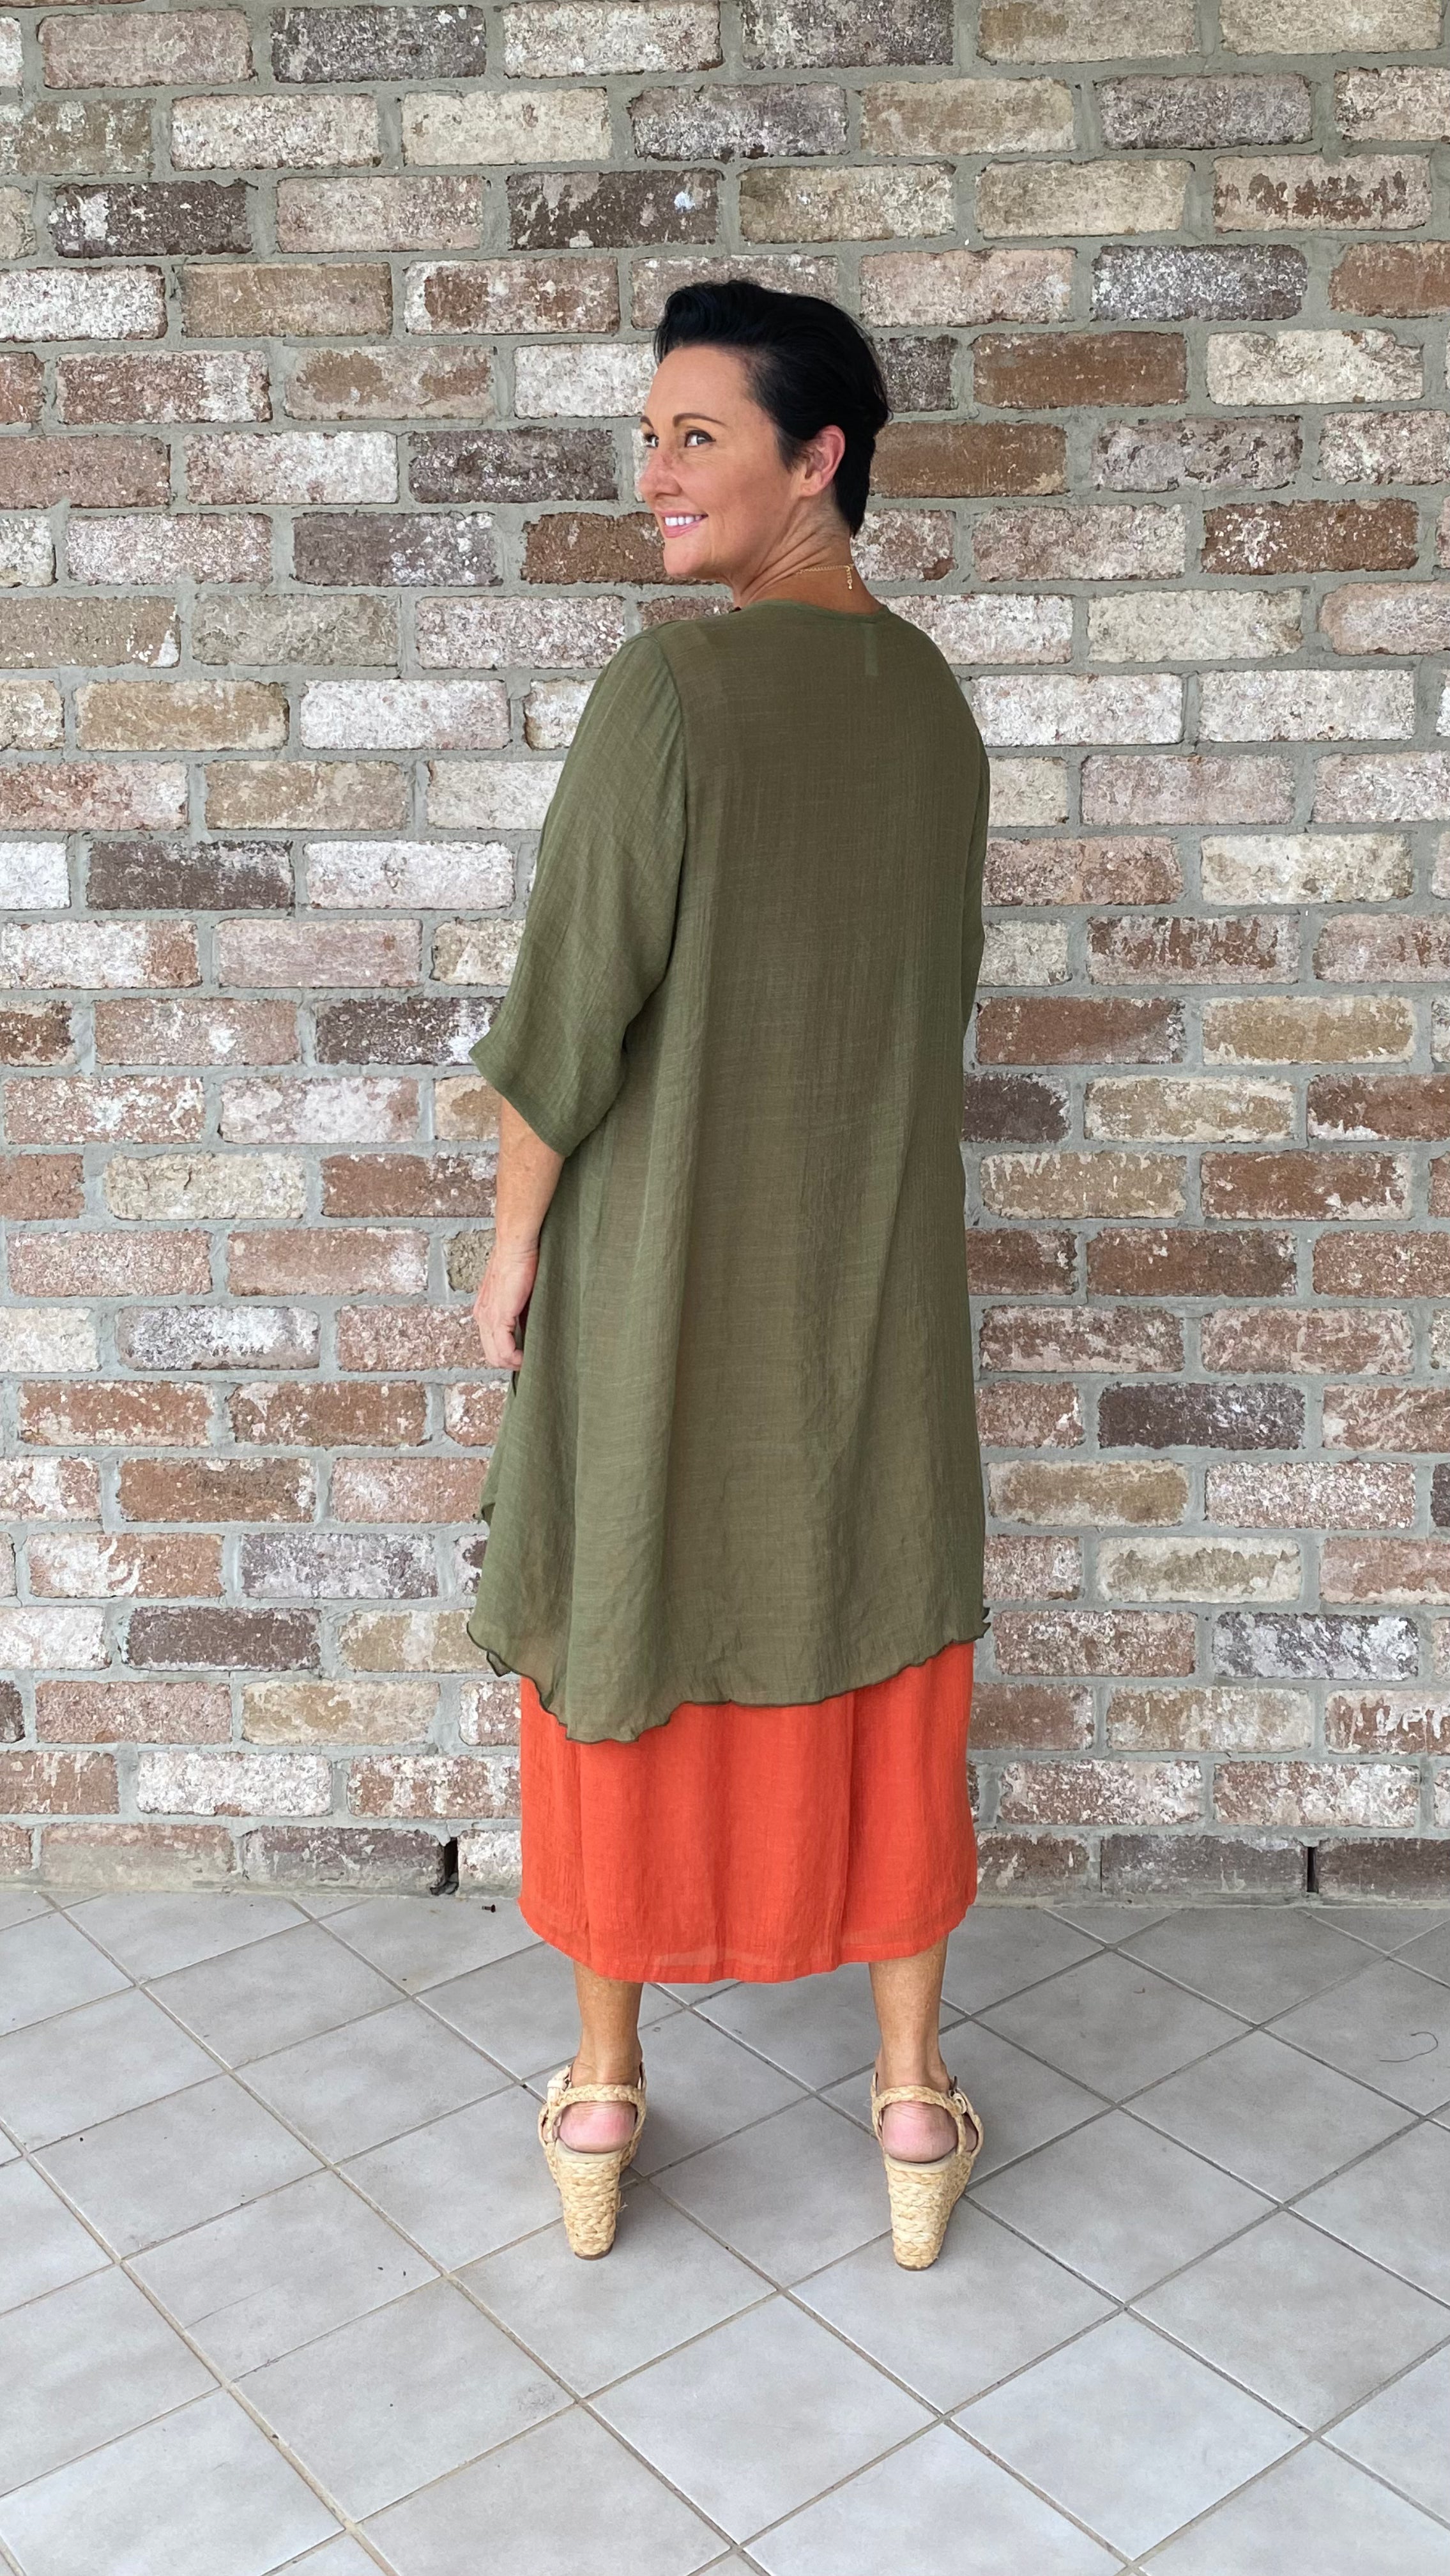 NEW LONG Infinity Jacket/Top Olive